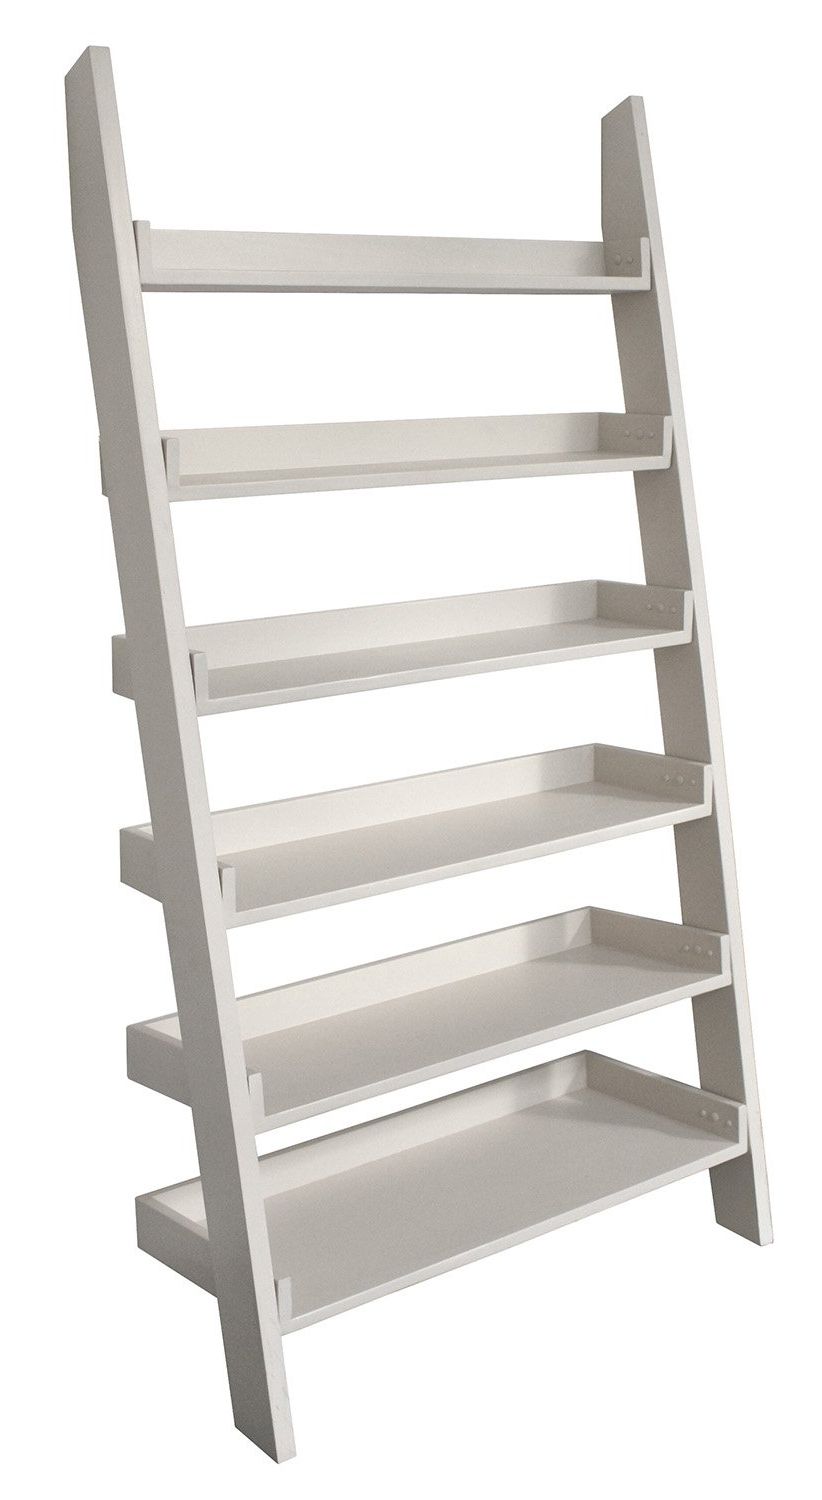 Fashionable Wide Ladder Bookcases Regarding Casamoré Gloucester Wooden Tall Wide Large Ladder Shelf 6 Shelving Unit  Bookcase Storage – Pearl White Painted (View 1 of 20)